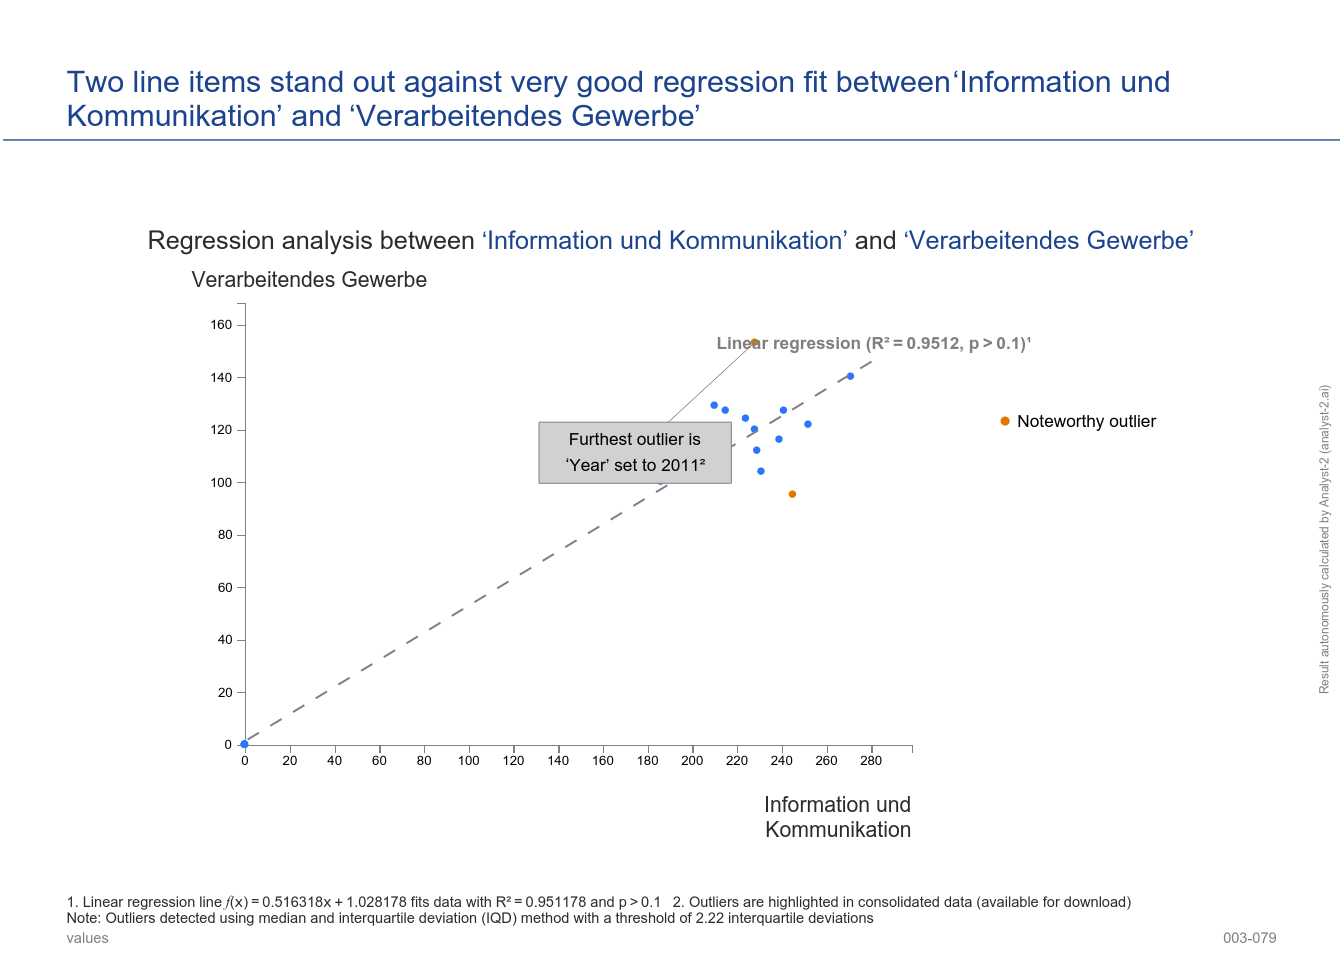 Evaluation of ‘Information und Kommunikation’ vs. ‘Verarbeitendes Gewerbe’ data results in two line items that stand out against an otherwise very strong regression. Line items in question include ‘Year’ set to 2011 with values of +228 (Information und Kommunikation) and +153 (Verarbeitendes Gewerbe) and ‘Year’ set to 2017 with values of +245 (Information und Kommunikation) and +95 (Verarbeitendes Gewerbe). (Gewerbemeldungen (Jahreszahlen) - 003-079)